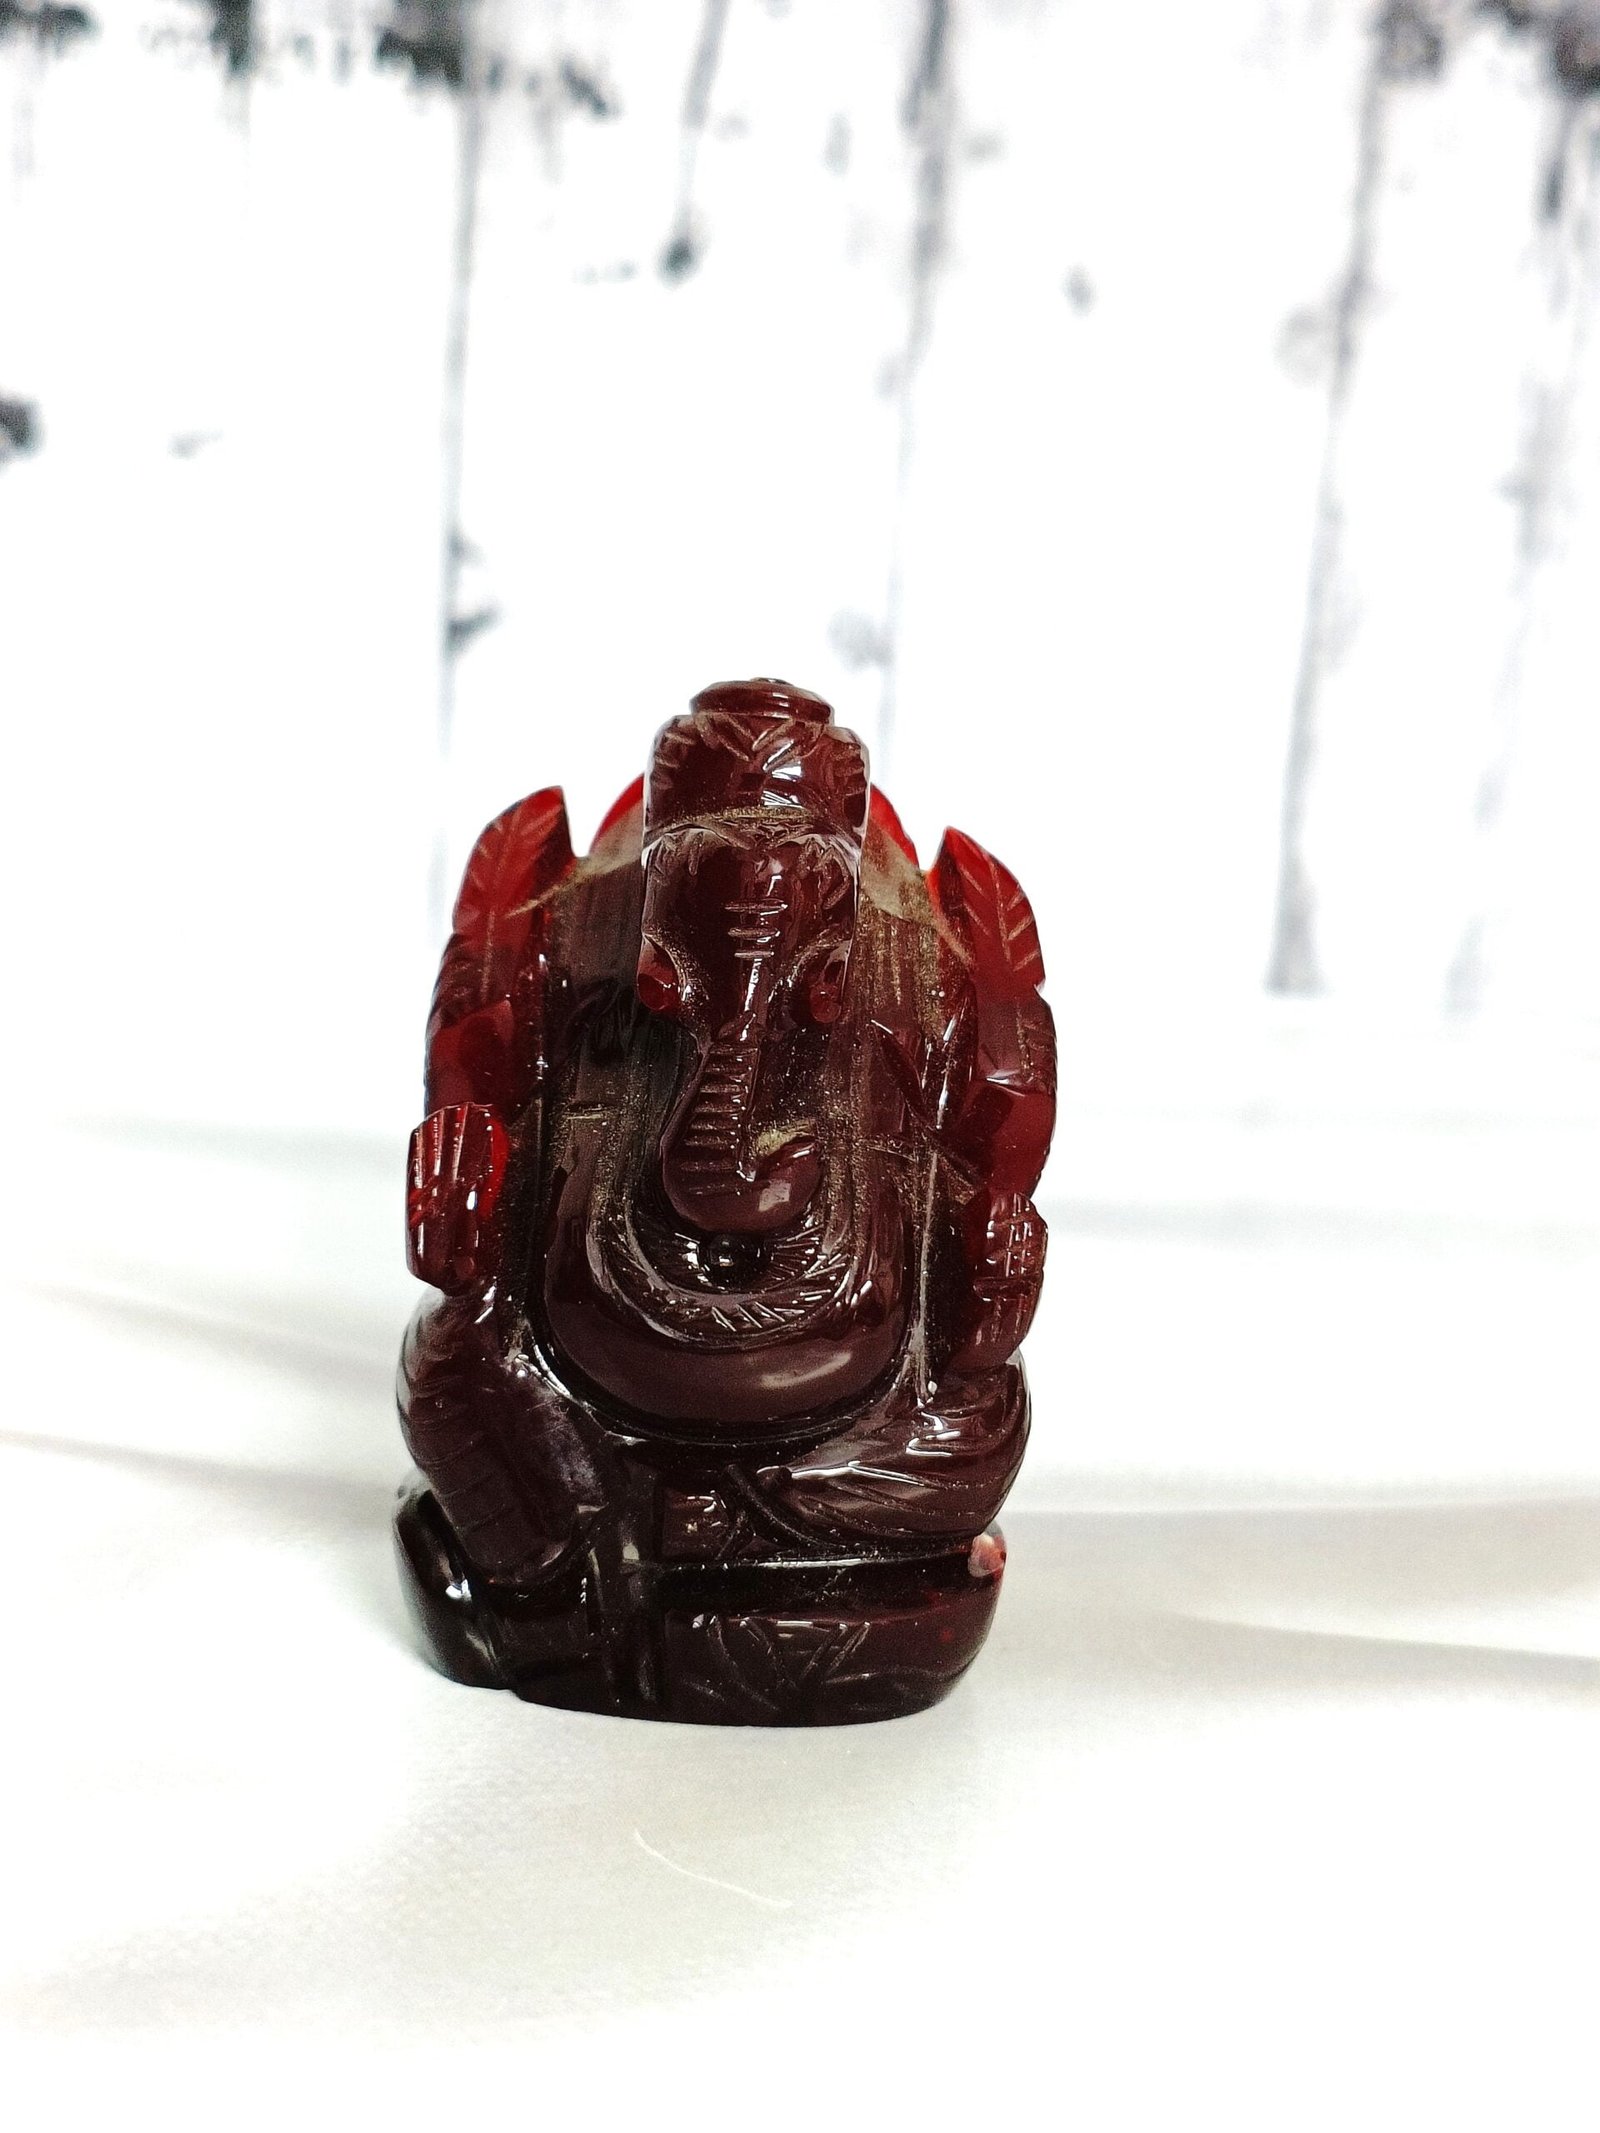 Natural Garnet Ganesha Figurine-3 Inches for Courage, Support, Strength